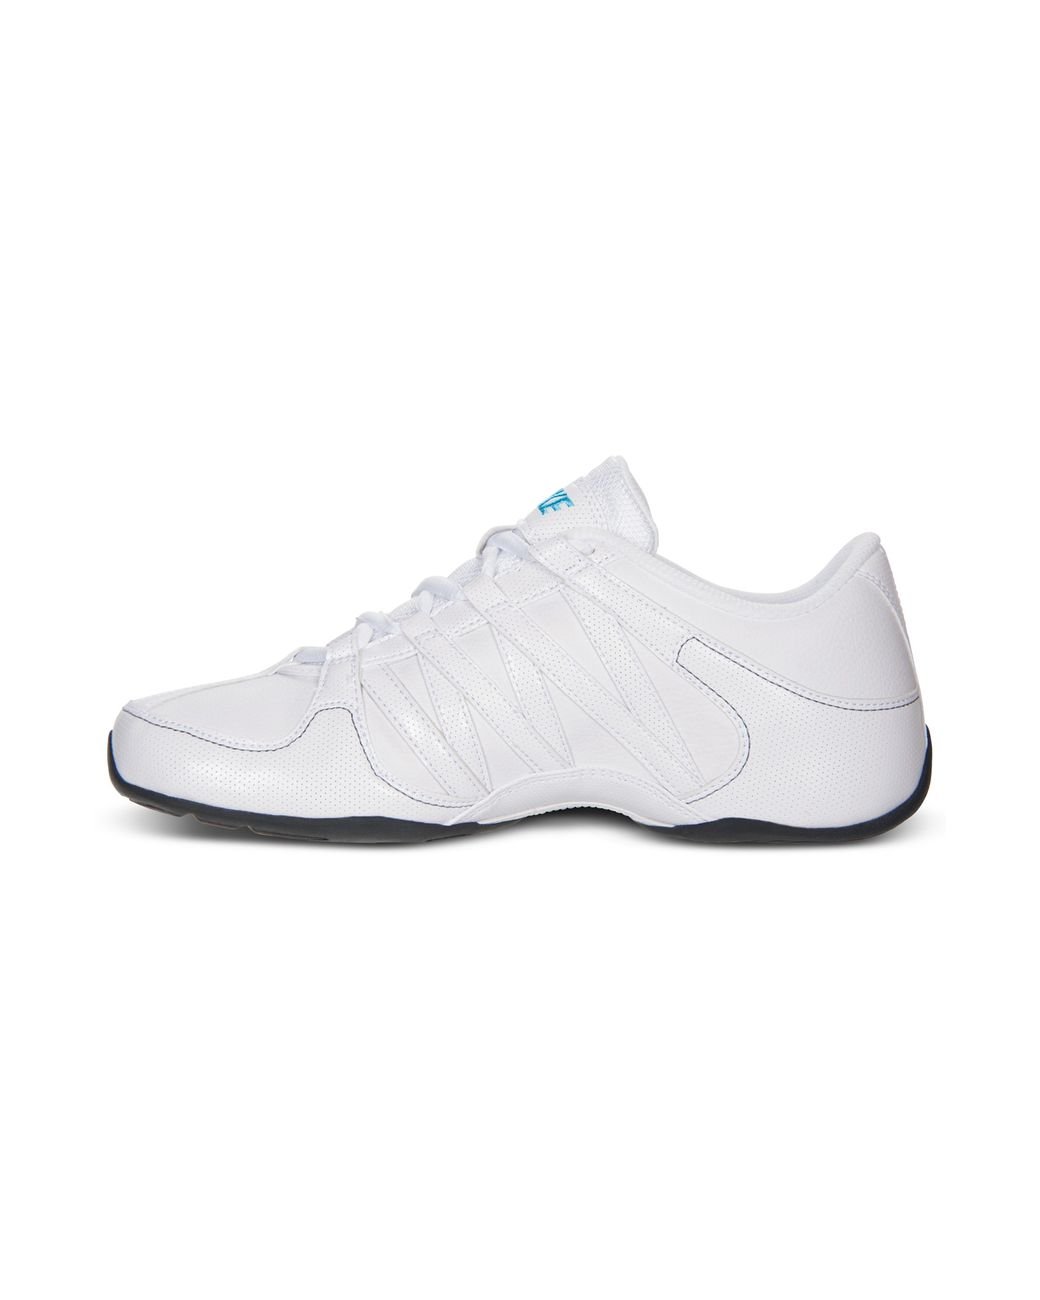 Nike Musique Iv Dance Sneakers in White | Lyst